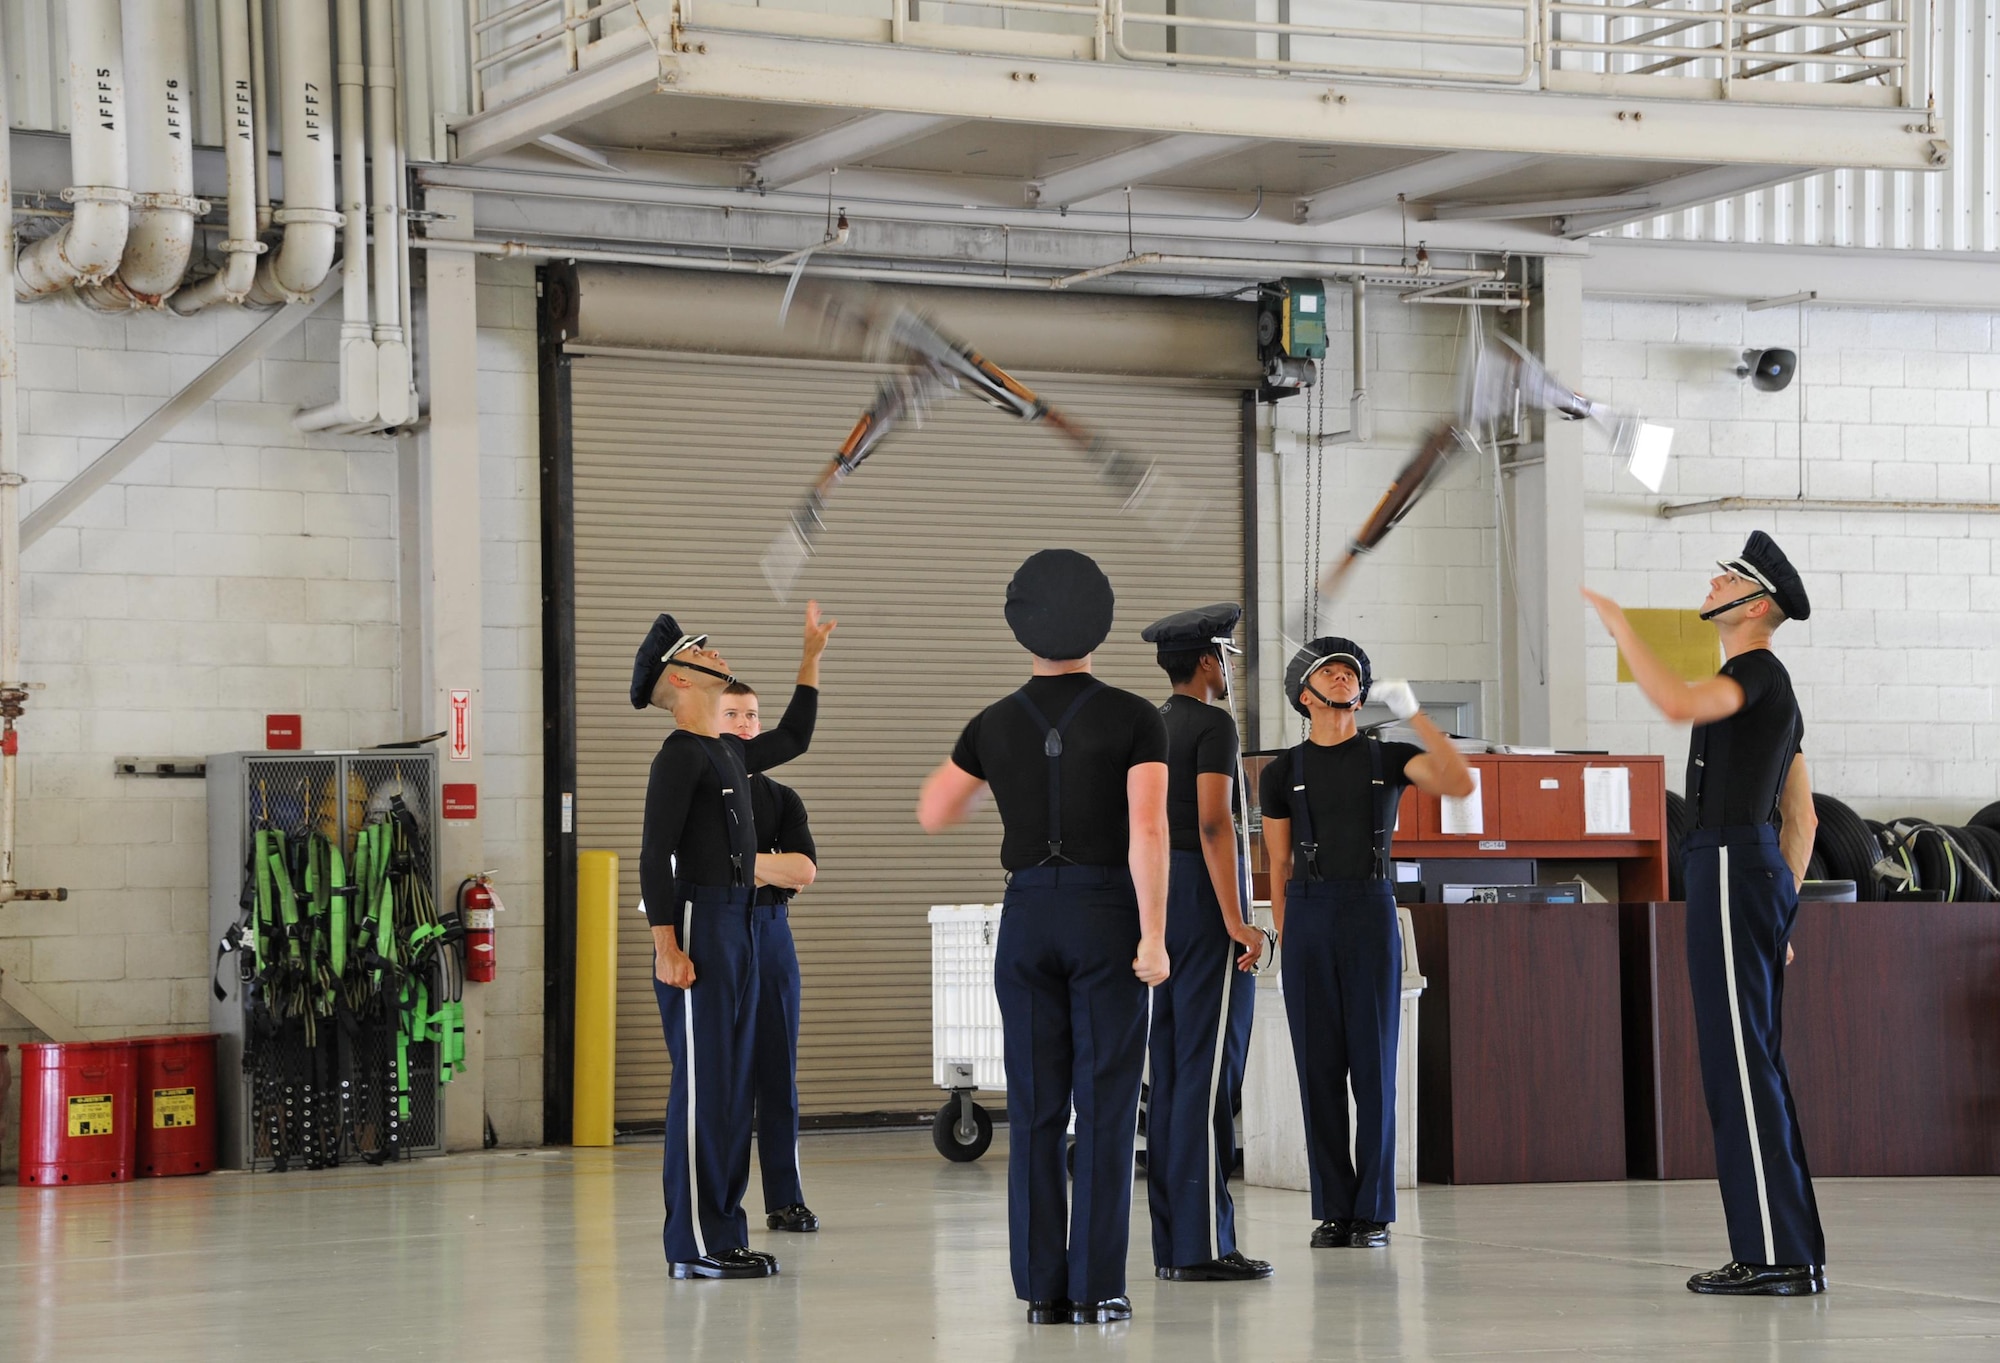 The U.S. Air Force Honor Guard Drill Team, stationed at Joint Base Anacostia-Bolling, Washington, D.C., practices drill movements before a U.S. Armed Forces Delayed Entry Program swear-in ceremony during the Memorial Day weekend National Salute to America’s Heroes Miami Air and Sea Show at U.S. Coast Guard Air Station Miami in Opa-Locka, Fla., May 26, 2017. The joint-service event allows the five branches of the Armed Forces to demonstrate and educate the public on their asset’s capabilities, and increases awareness and understanding of each branch’s unique mission. (U.S. Air Force photo by Senior Airman Erin Trower)